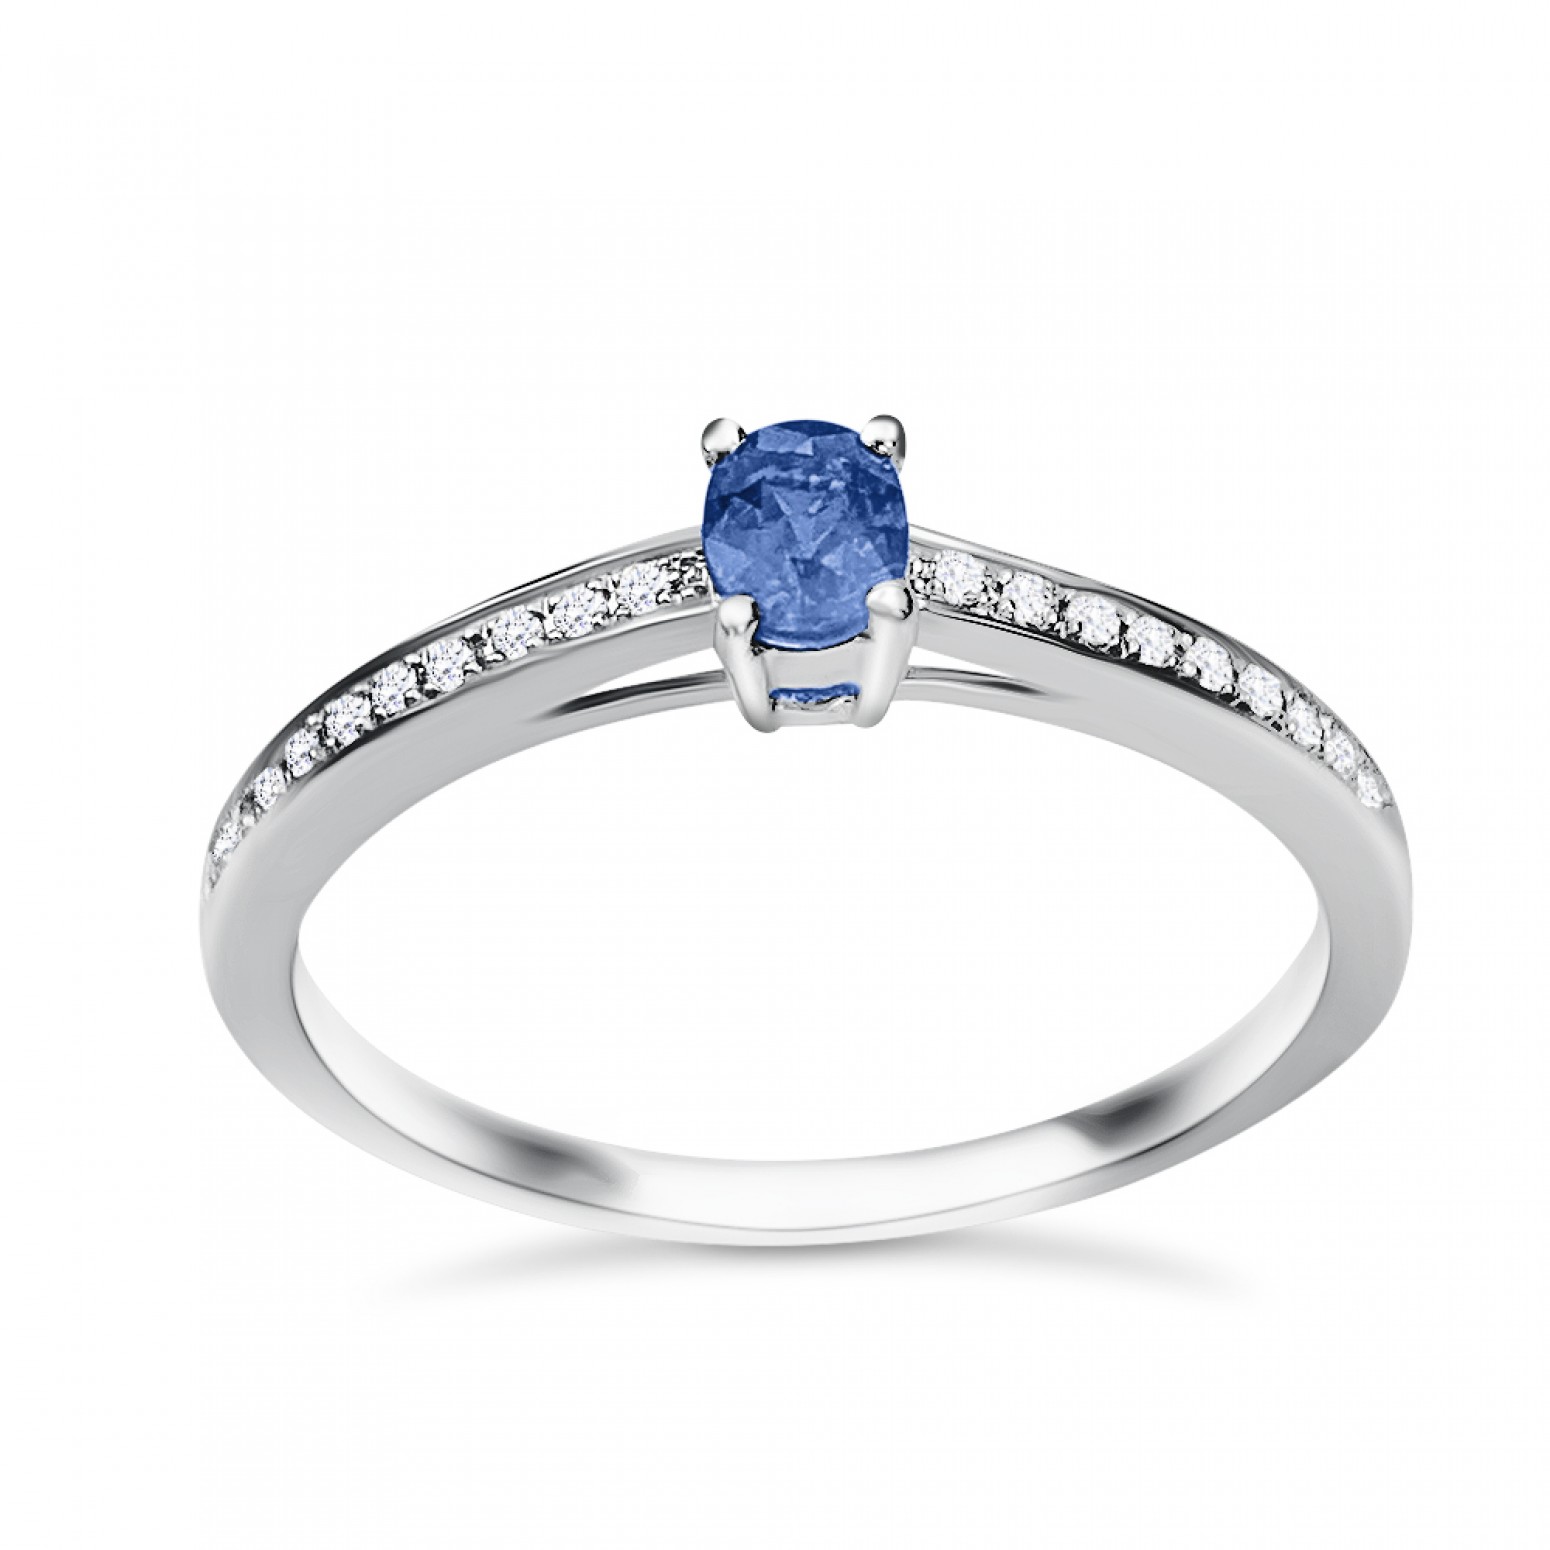 Solitaire ring 18K white gold with sapphire 0.28ct and diamonds, VS1, F da3436 ENGAGEMENT RINGS Κοσμηματα - chrilia.gr